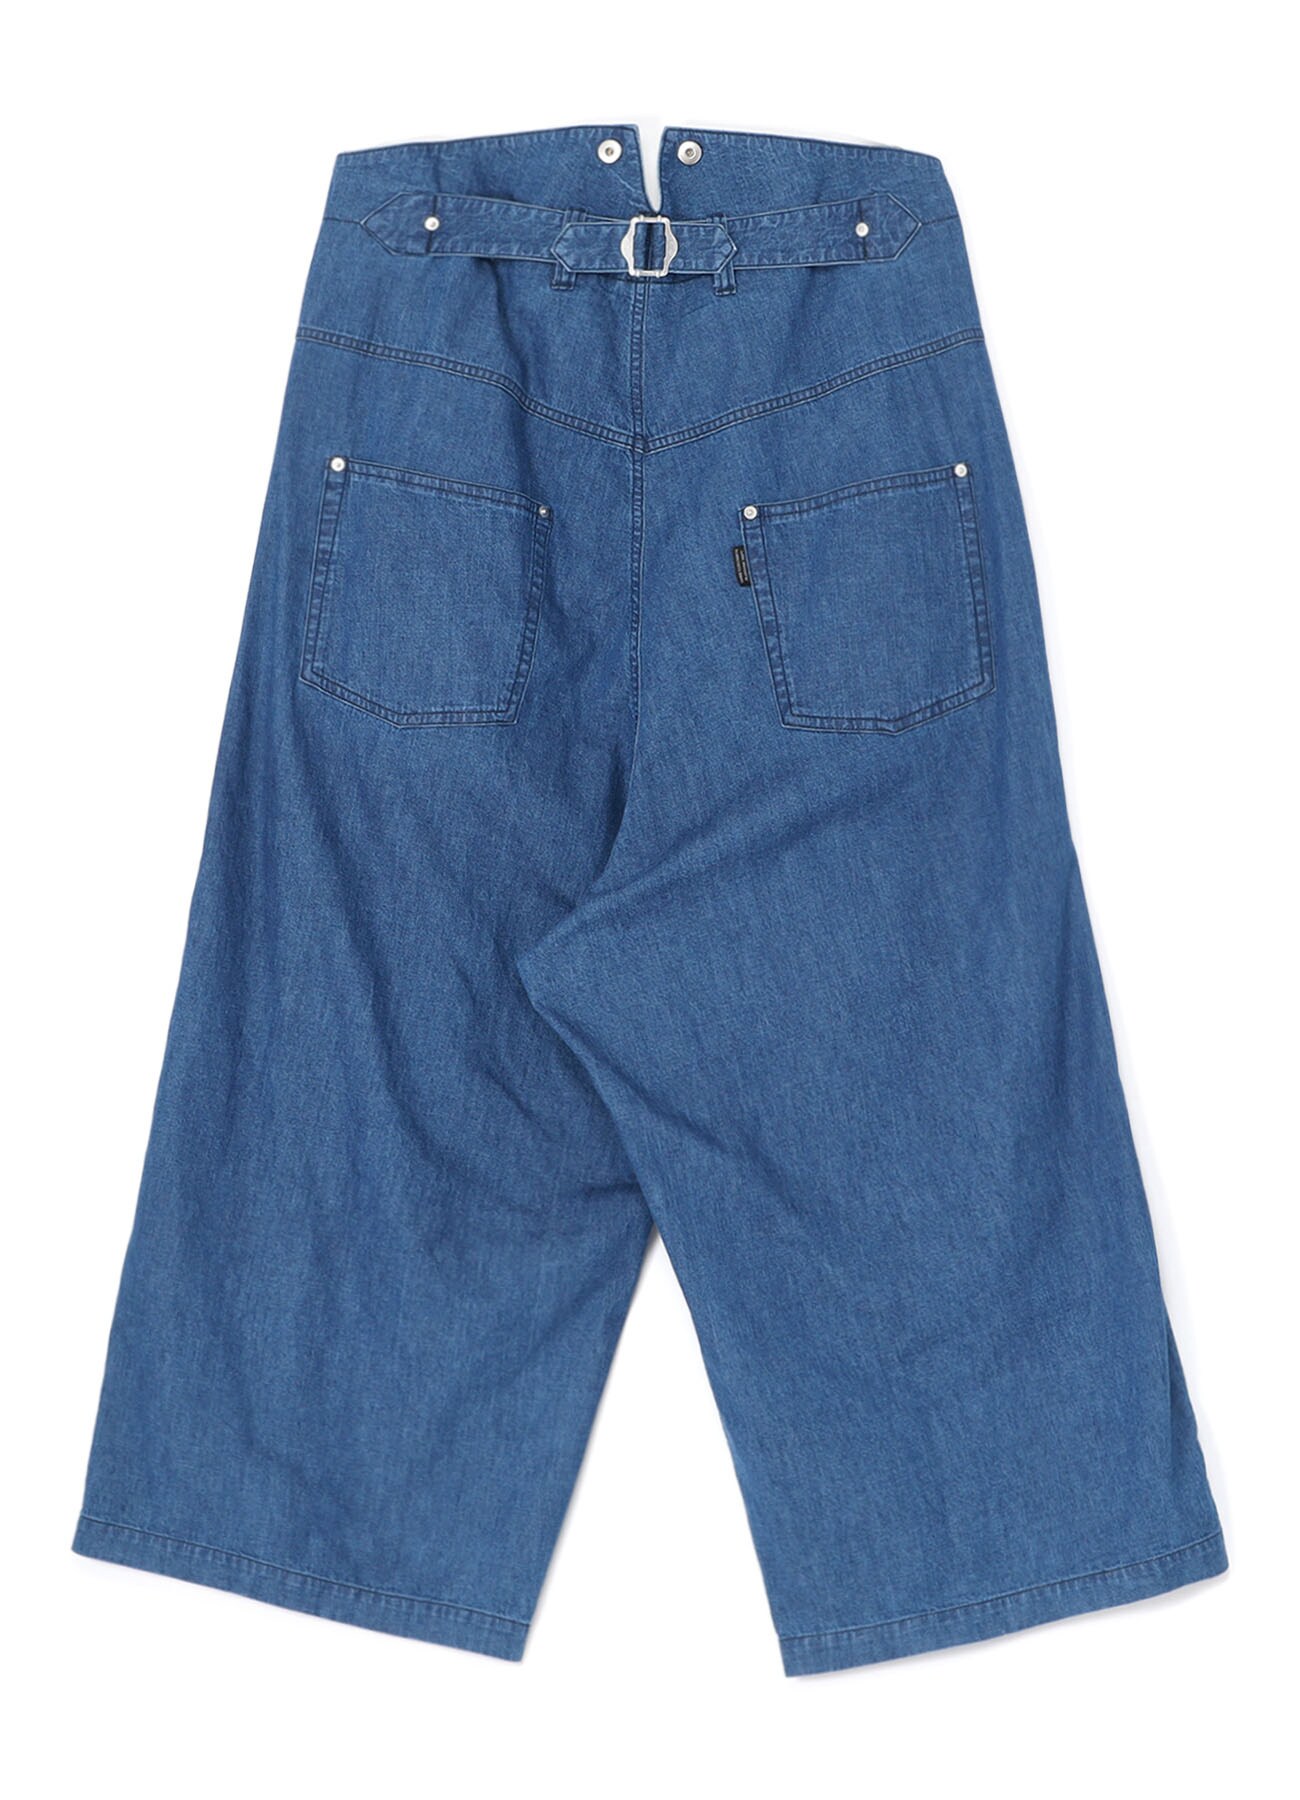 DENIM PANTS WITH SUSPENDER BUTTONS AND ADJUSTABLE SIDE TABS(S INDIGO):  Soldes｜WILDSIDE YOHJI YAMAMOTO【Official】